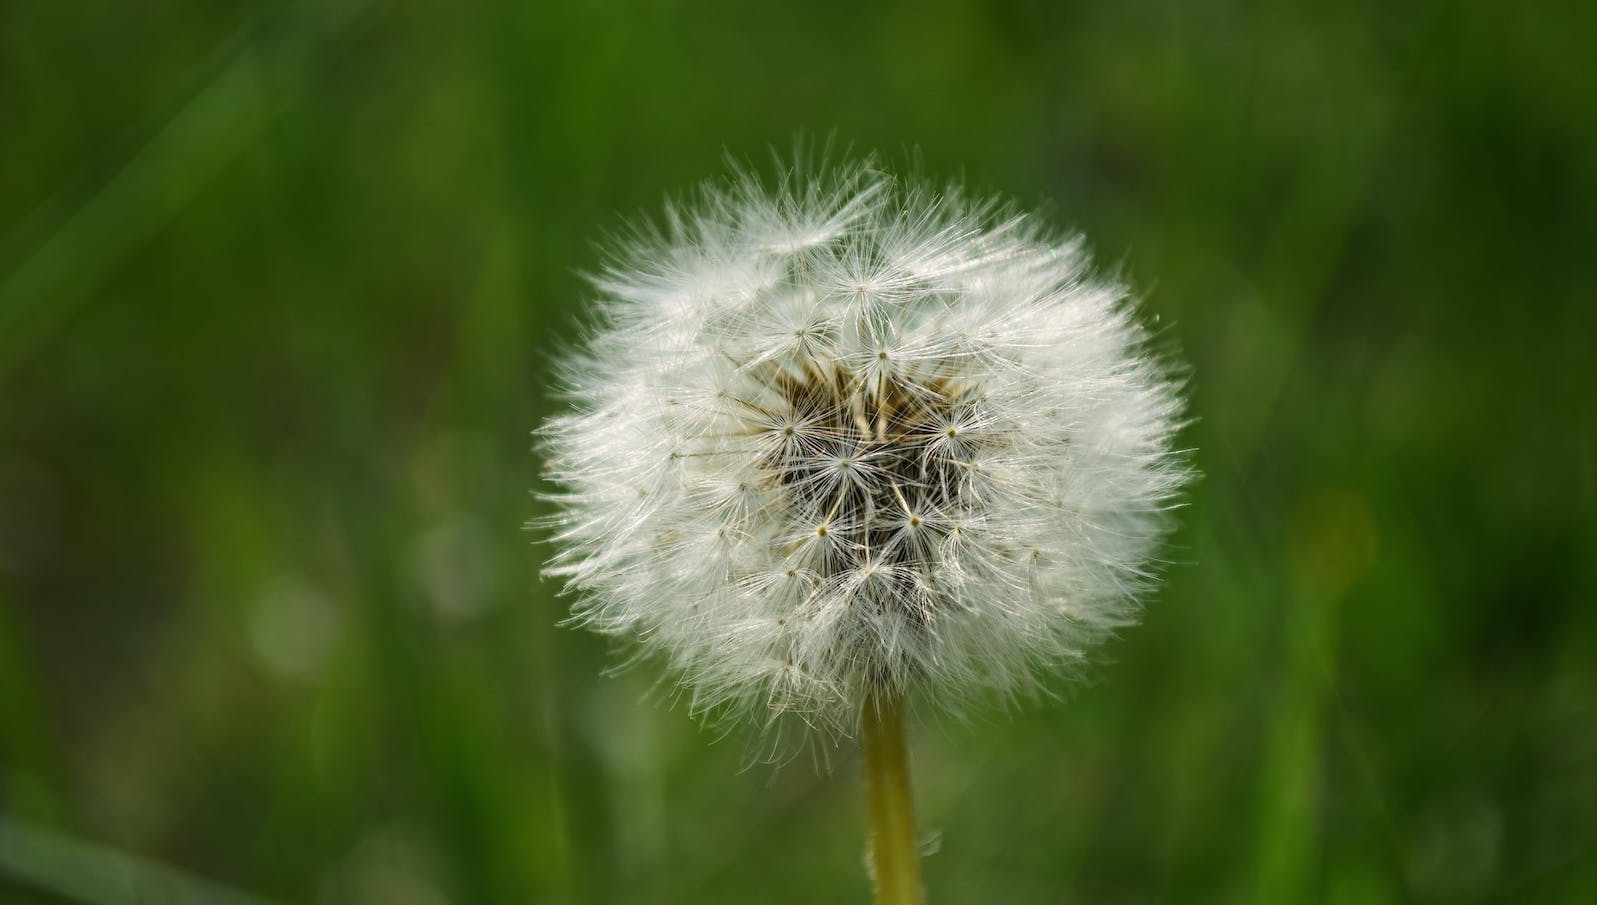 A white dandelion in the foreground with green plants in the background